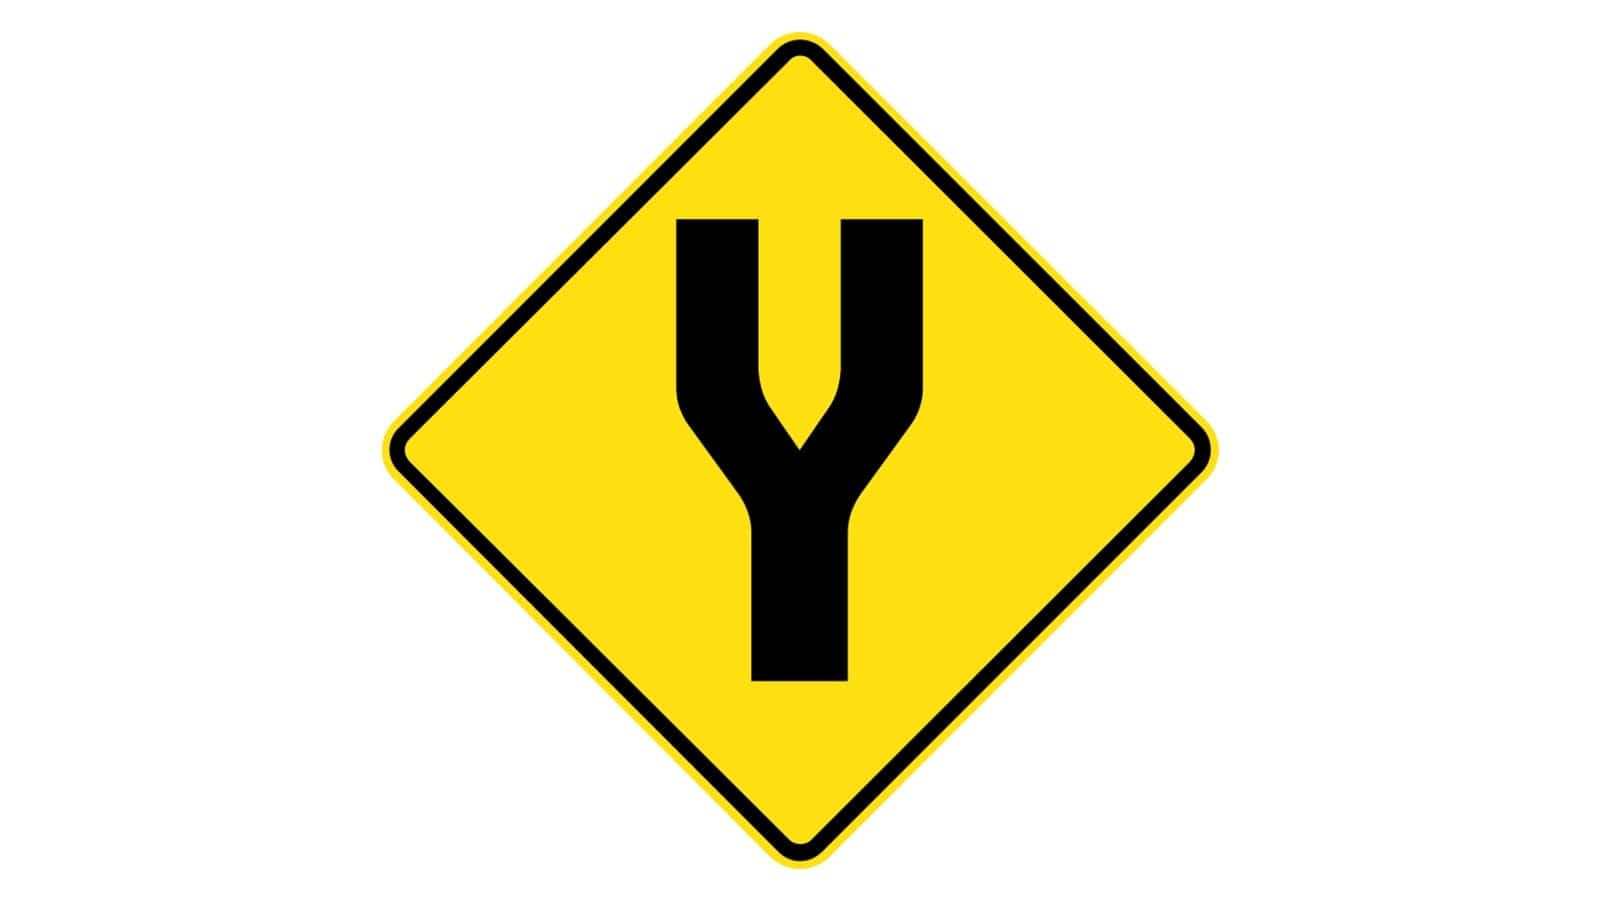 Divided Road Sign